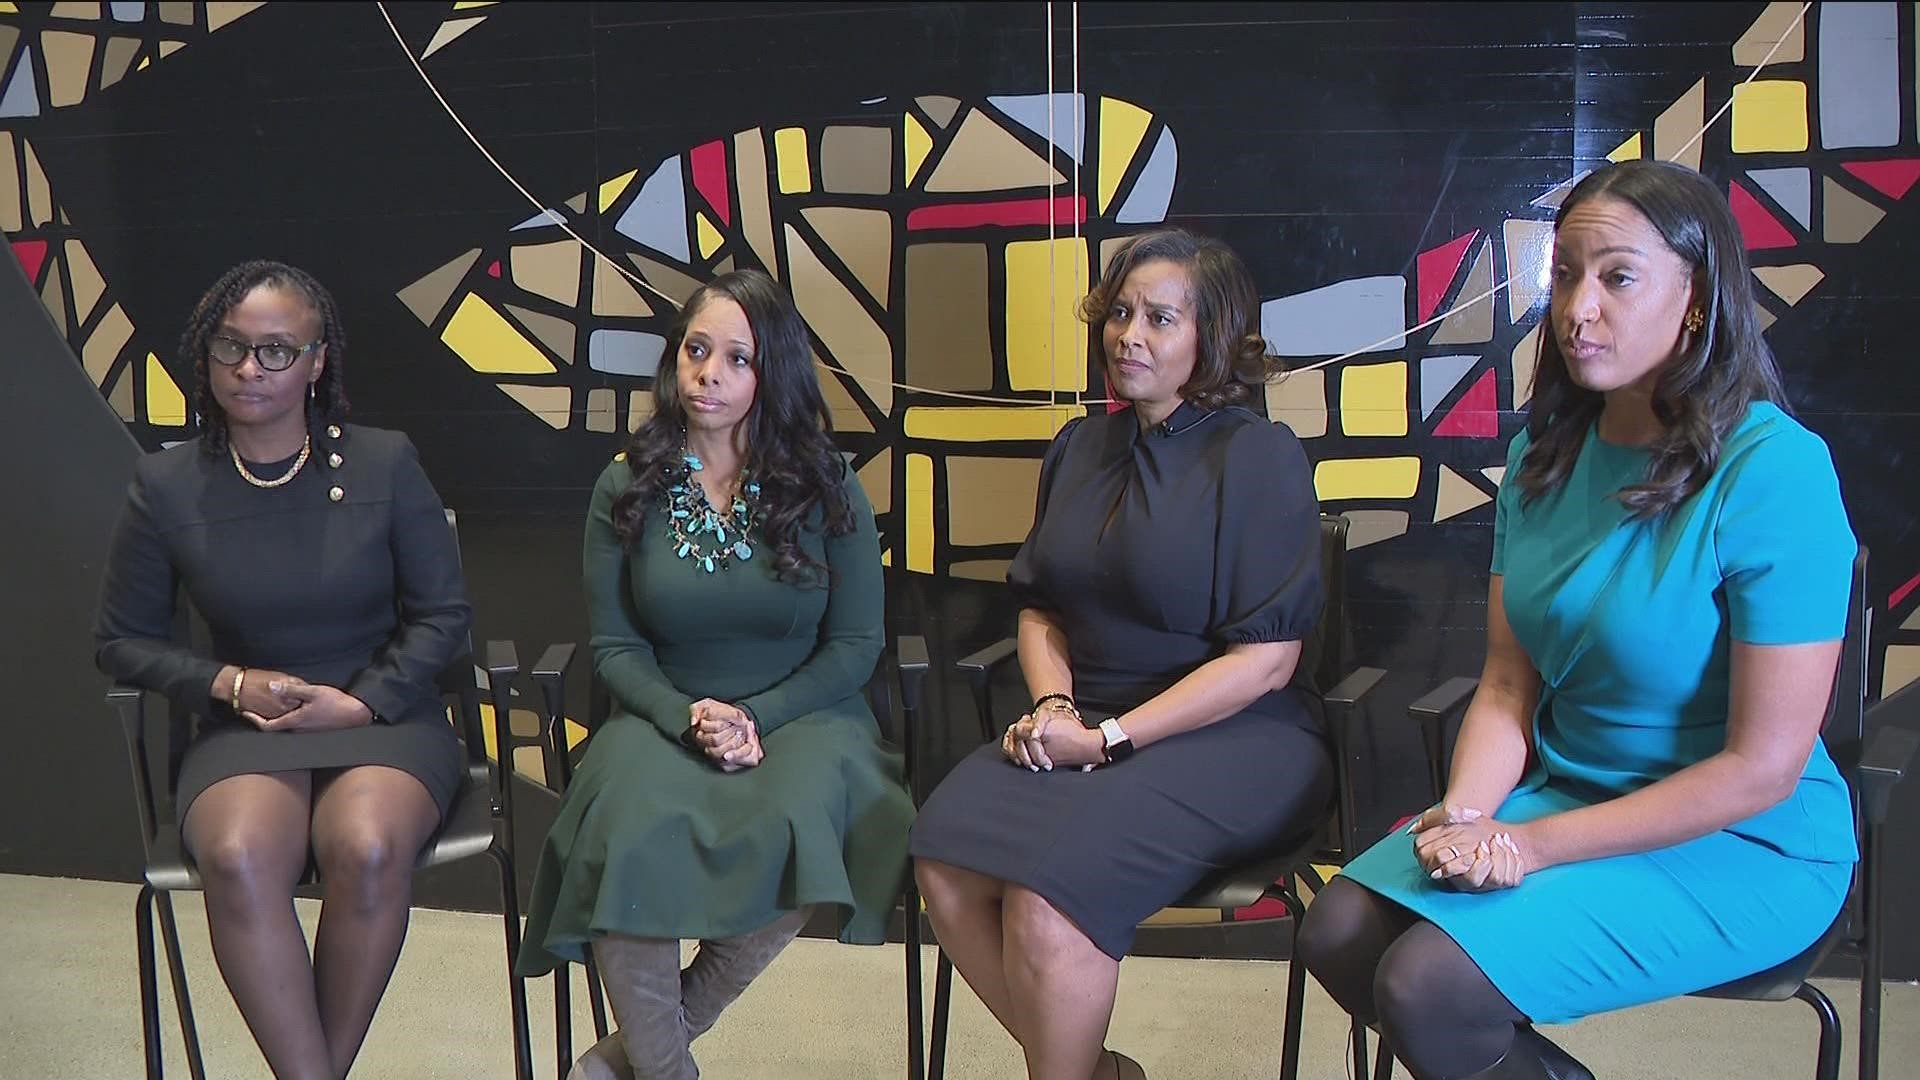 These four women are part of pushing the movement forward.